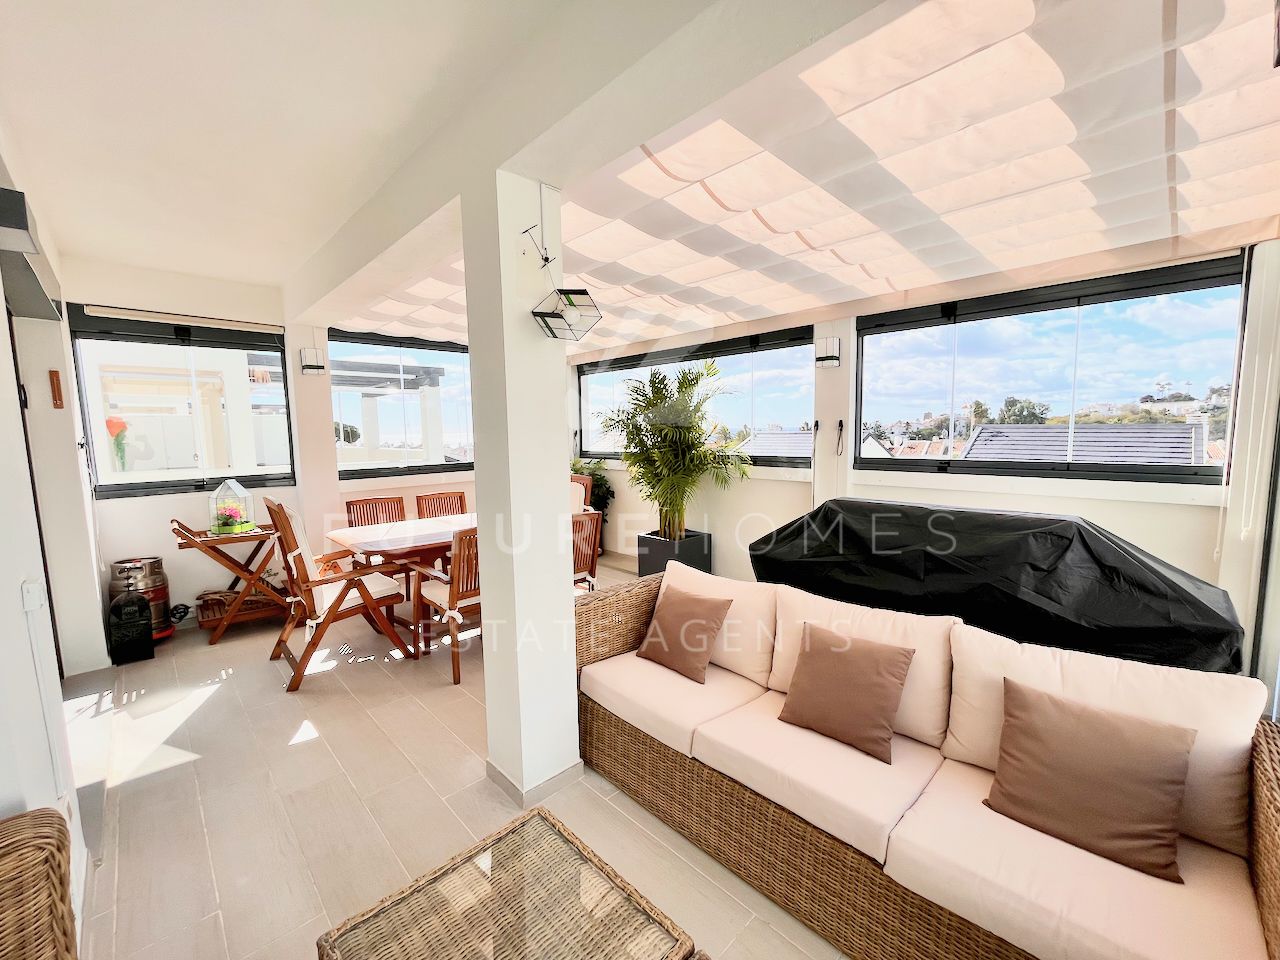 Spacious modern apartment in beachside location only 5 minutes from Estepona port.